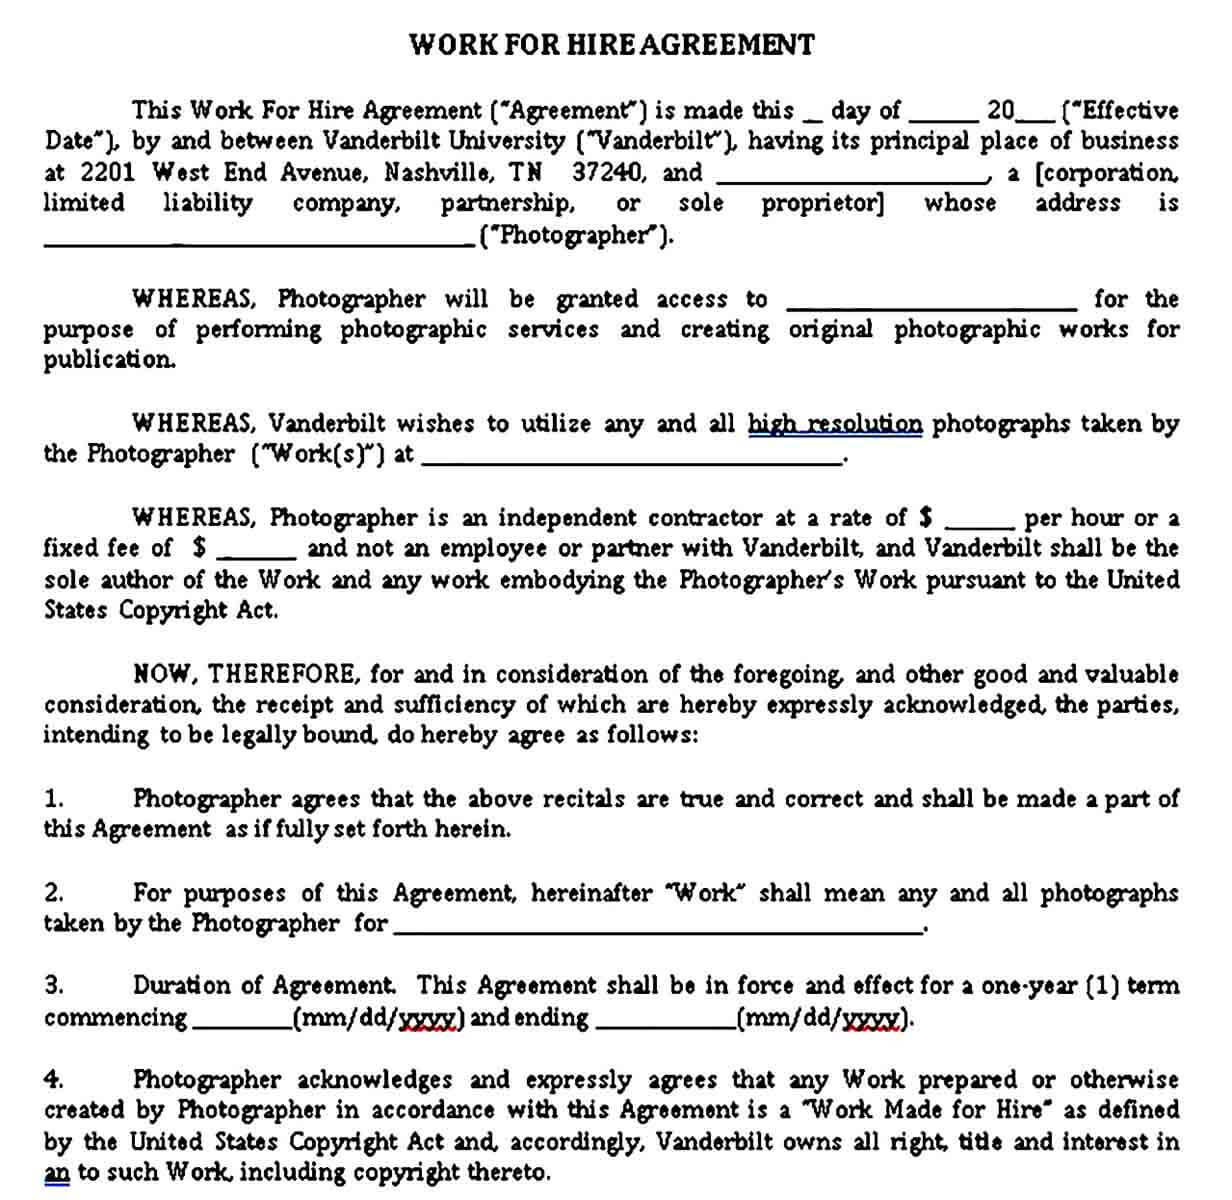 Work for Hire Agreement Format